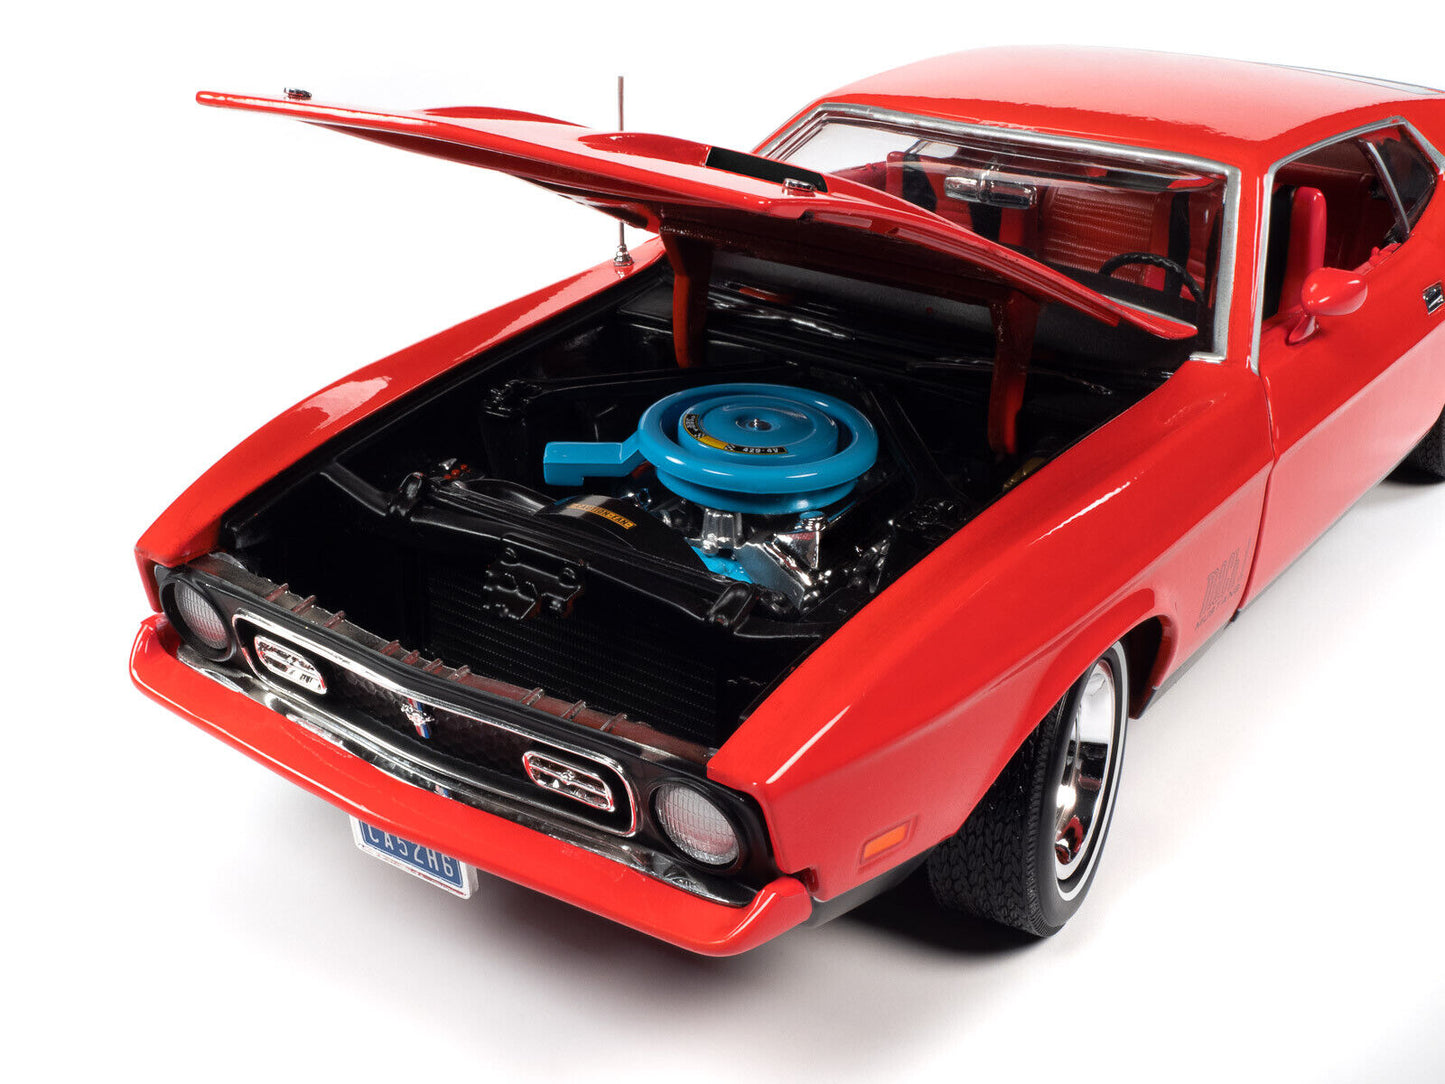 1971 Ford Mustang Mach 1 Bright Red with Red Interior (James Bond 007) "Diamonds are Forever" (1971) Movie 1/18 Diecast Model Car by Auto World